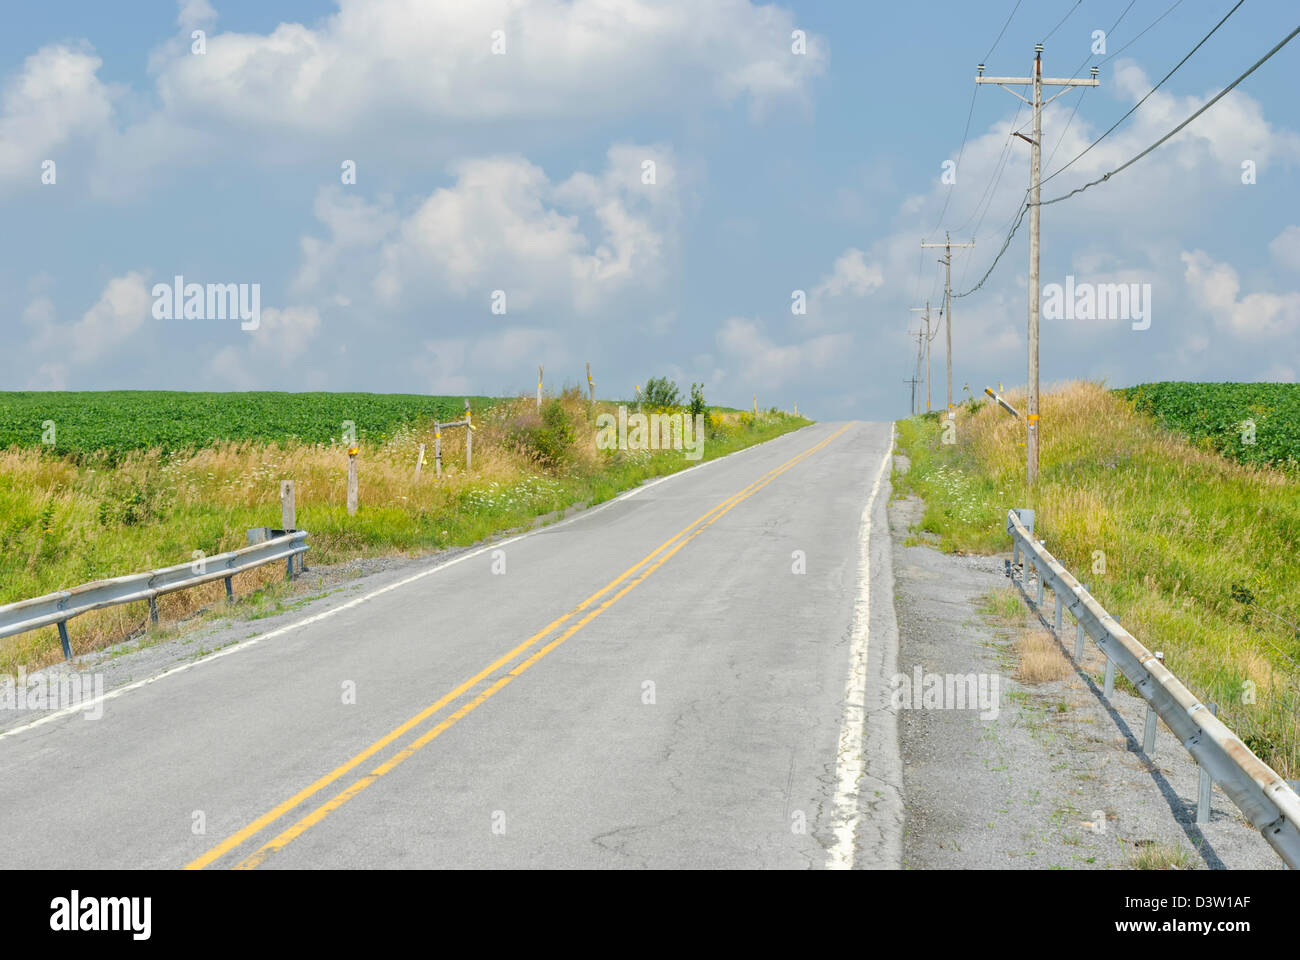 Country road heading over a hill under sunny blue skies with white clouds, a two lane summer highway in rural Pennsylvania, PA, Stock Photo